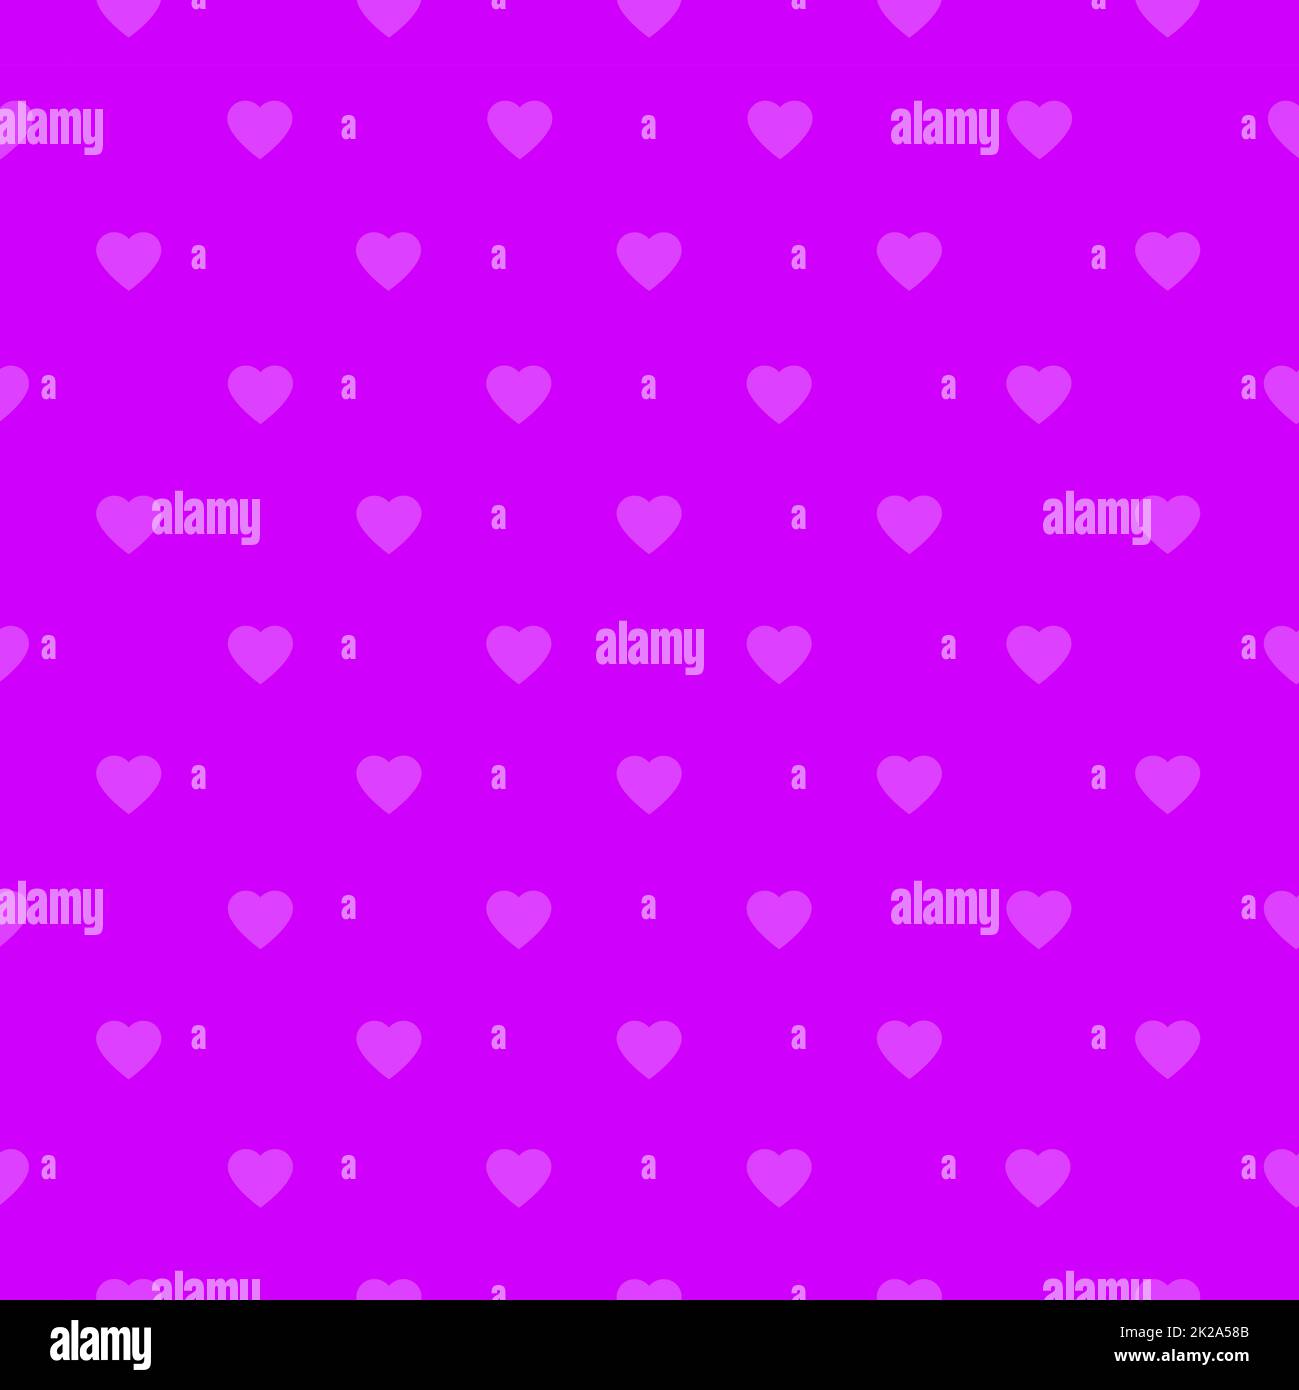 Seamless repeating purple hearts pattern on a purple background Stock Photo